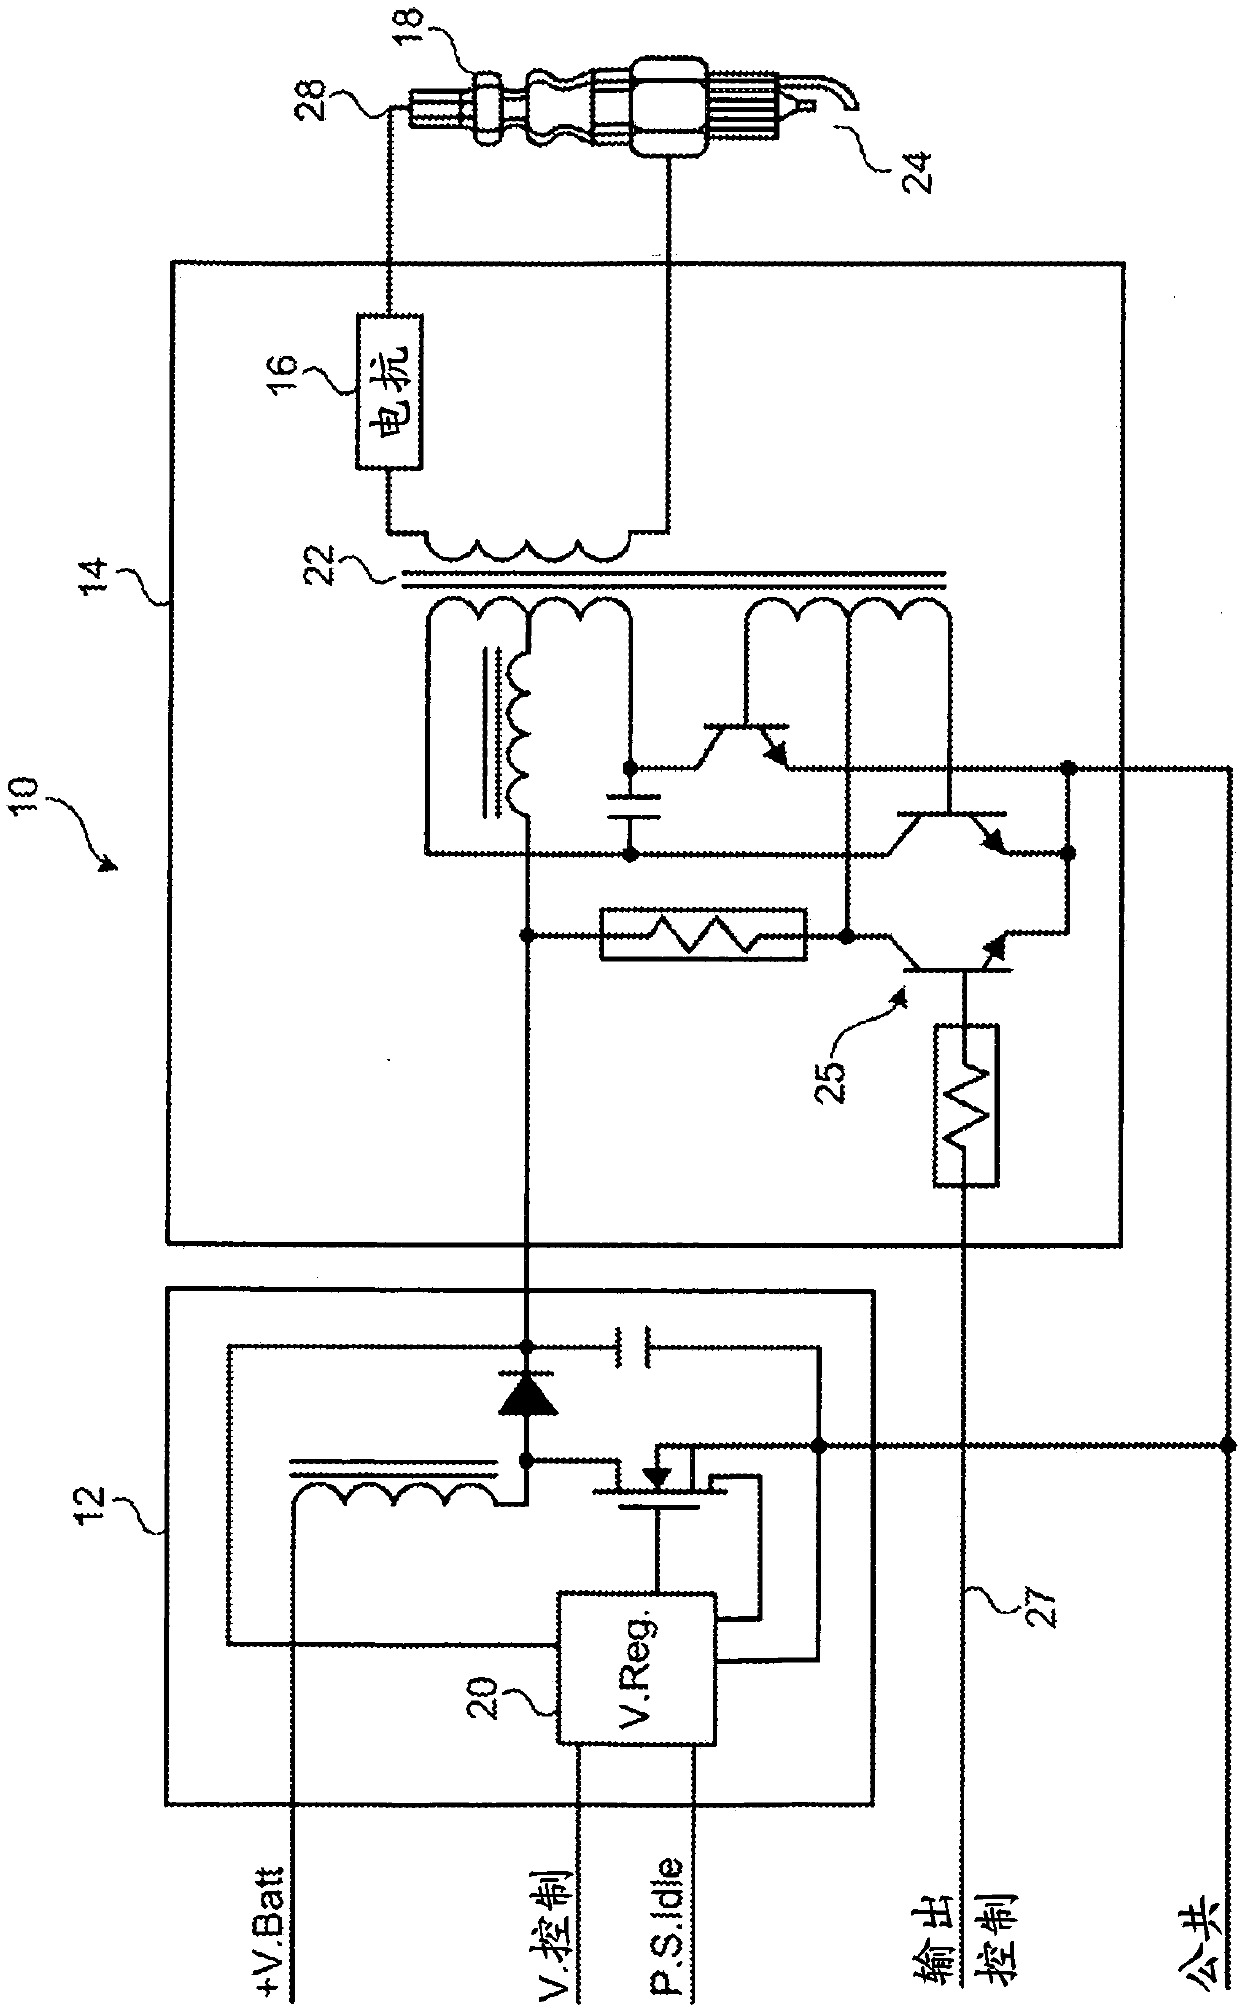 Forced frequency ignition system for internal combustion engines